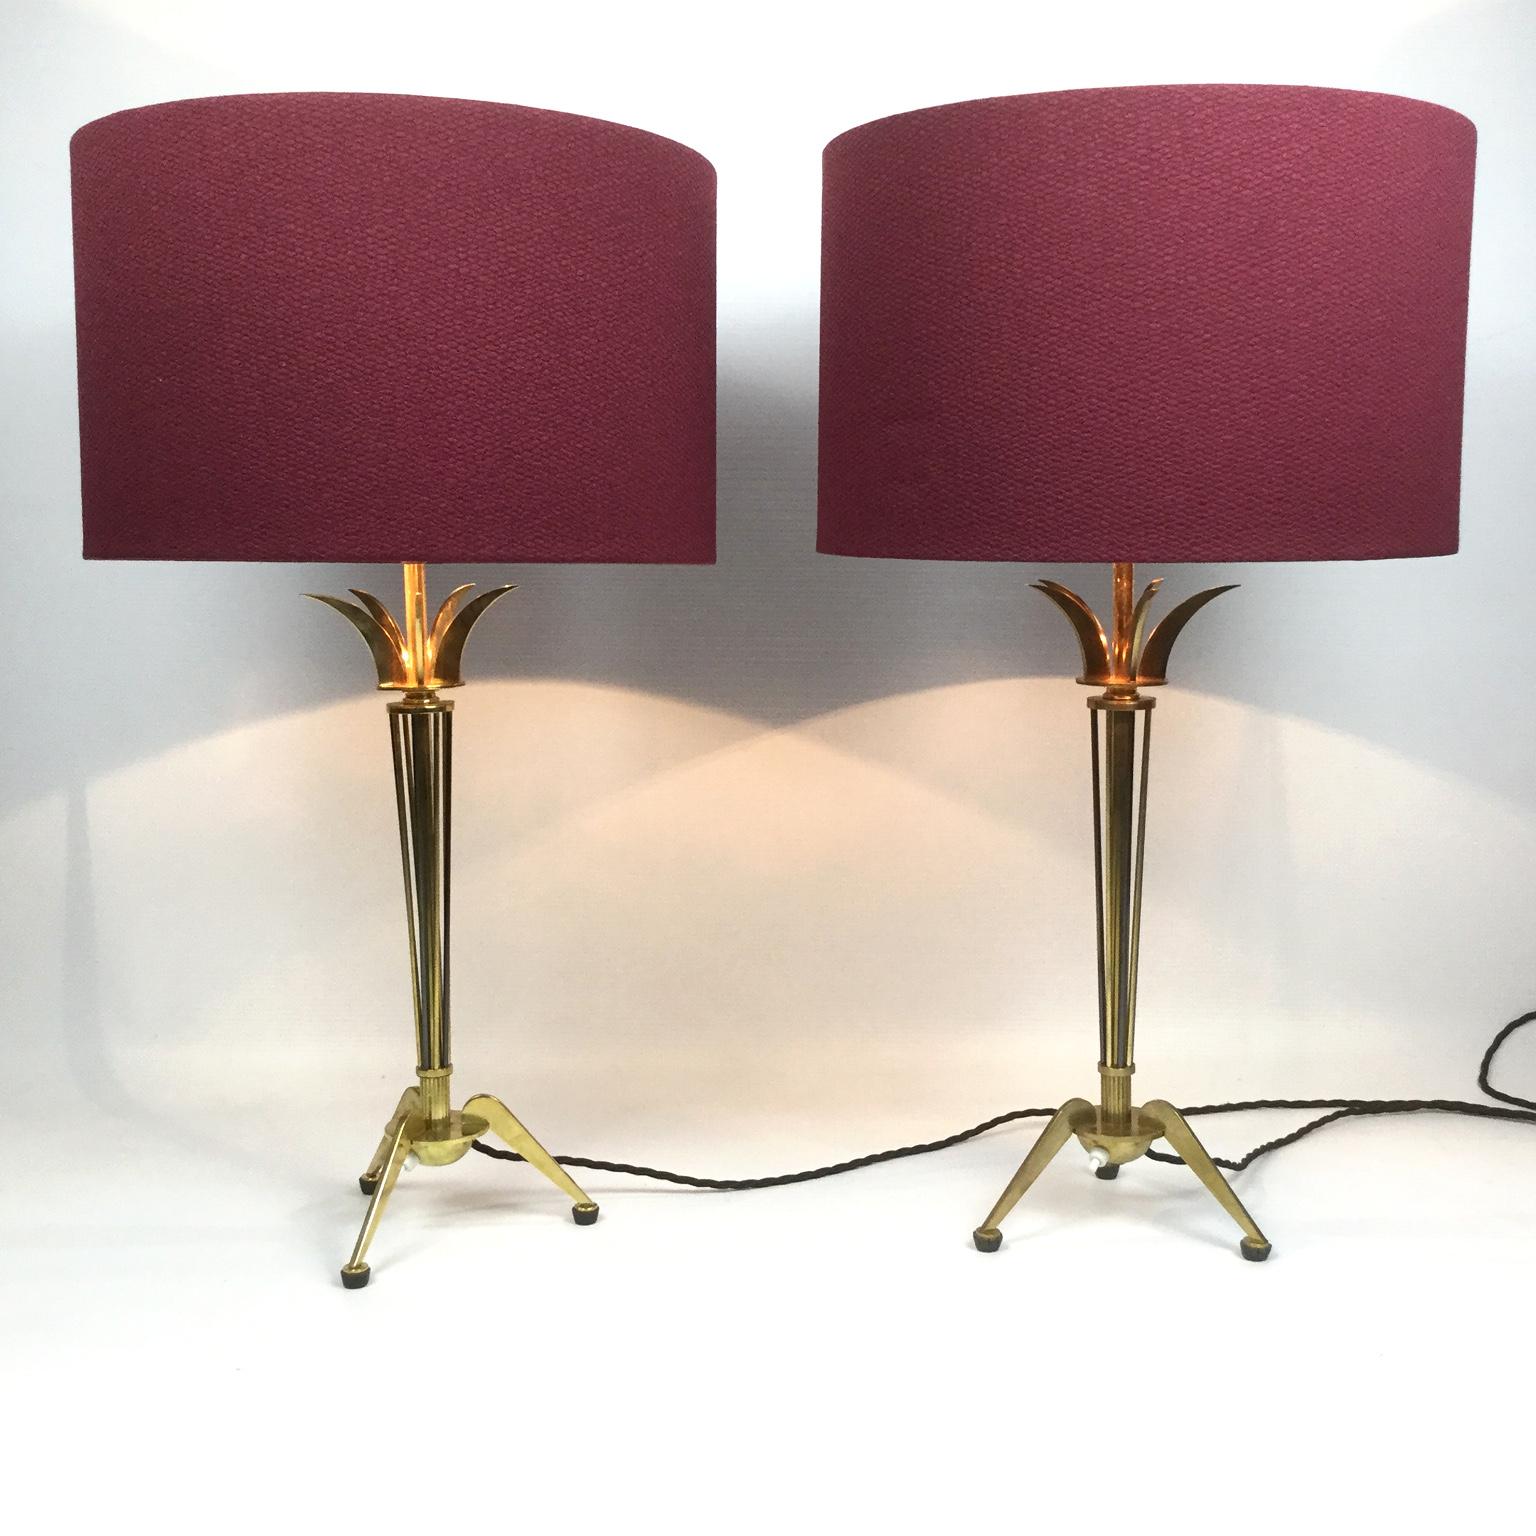 20th Century Pair of Brass Table Lamps by Maison Arlus for Maison Jansen, France, 1950s For Sale